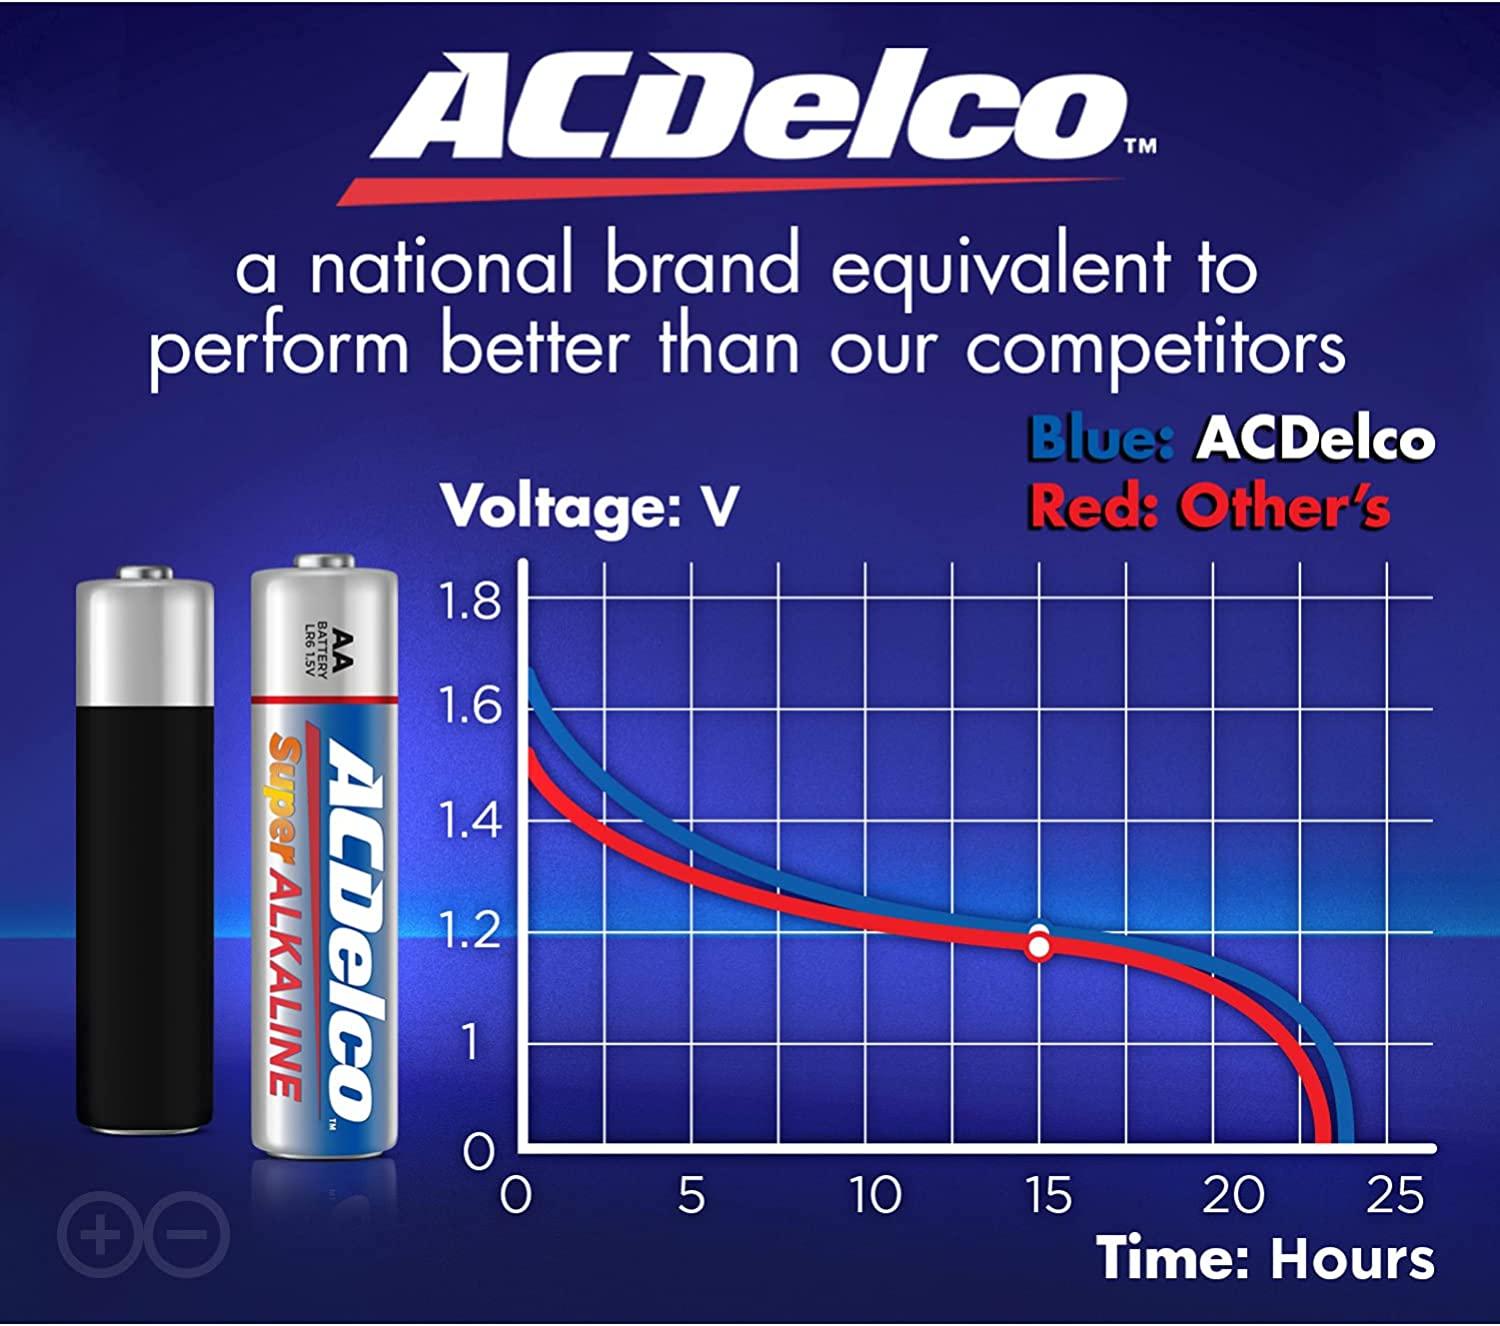 ACDelco 48-Count AA Batteries, Maximum Power Super Alkaline Battery 10-Year  Shelf Life QUICK REVIEW 